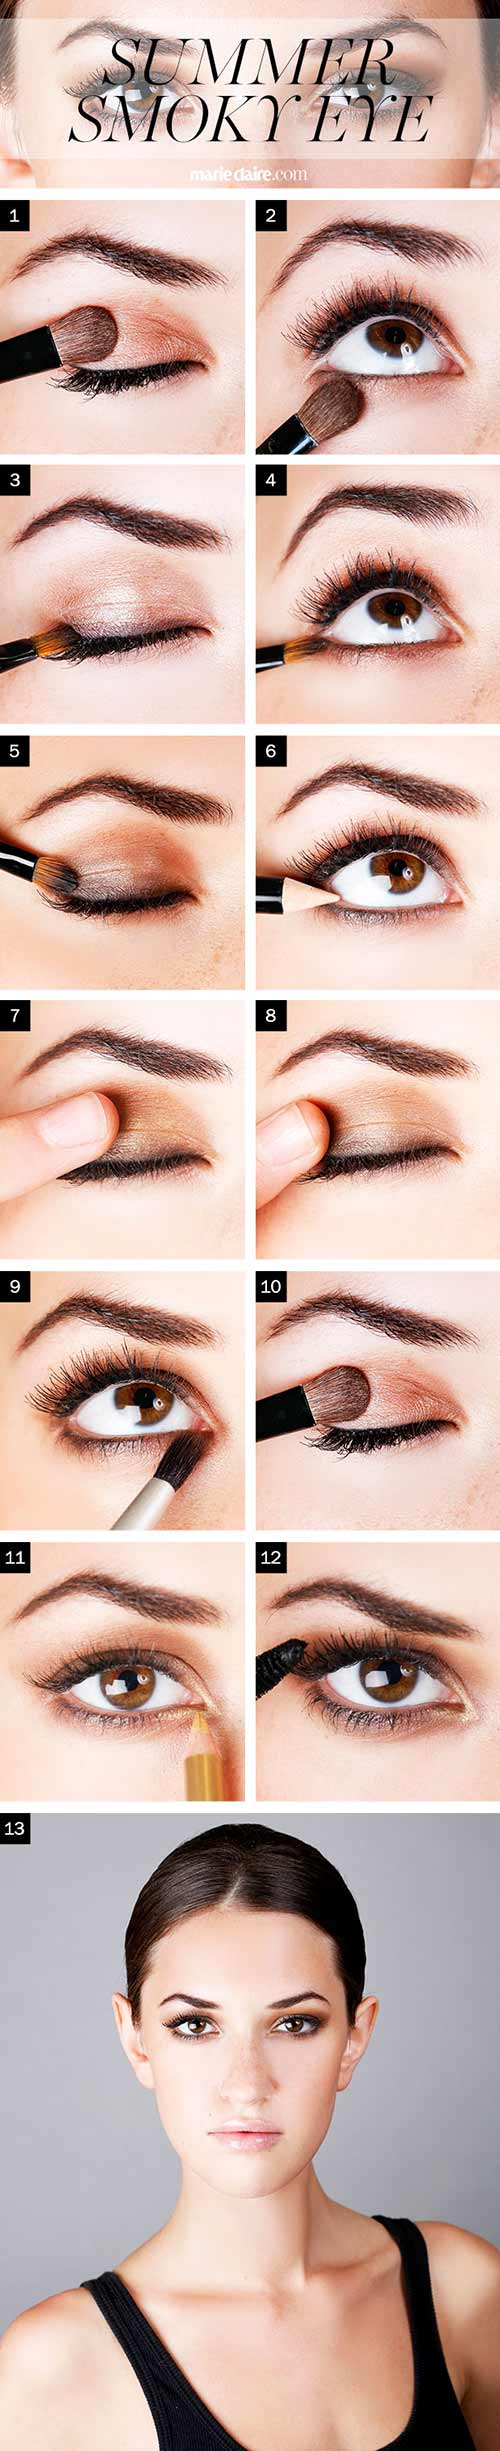 Soft Pink Eye Makeup Tutorial How To Do Smokey Eye Makeup Top 10 Tutorial Pictures For 2019